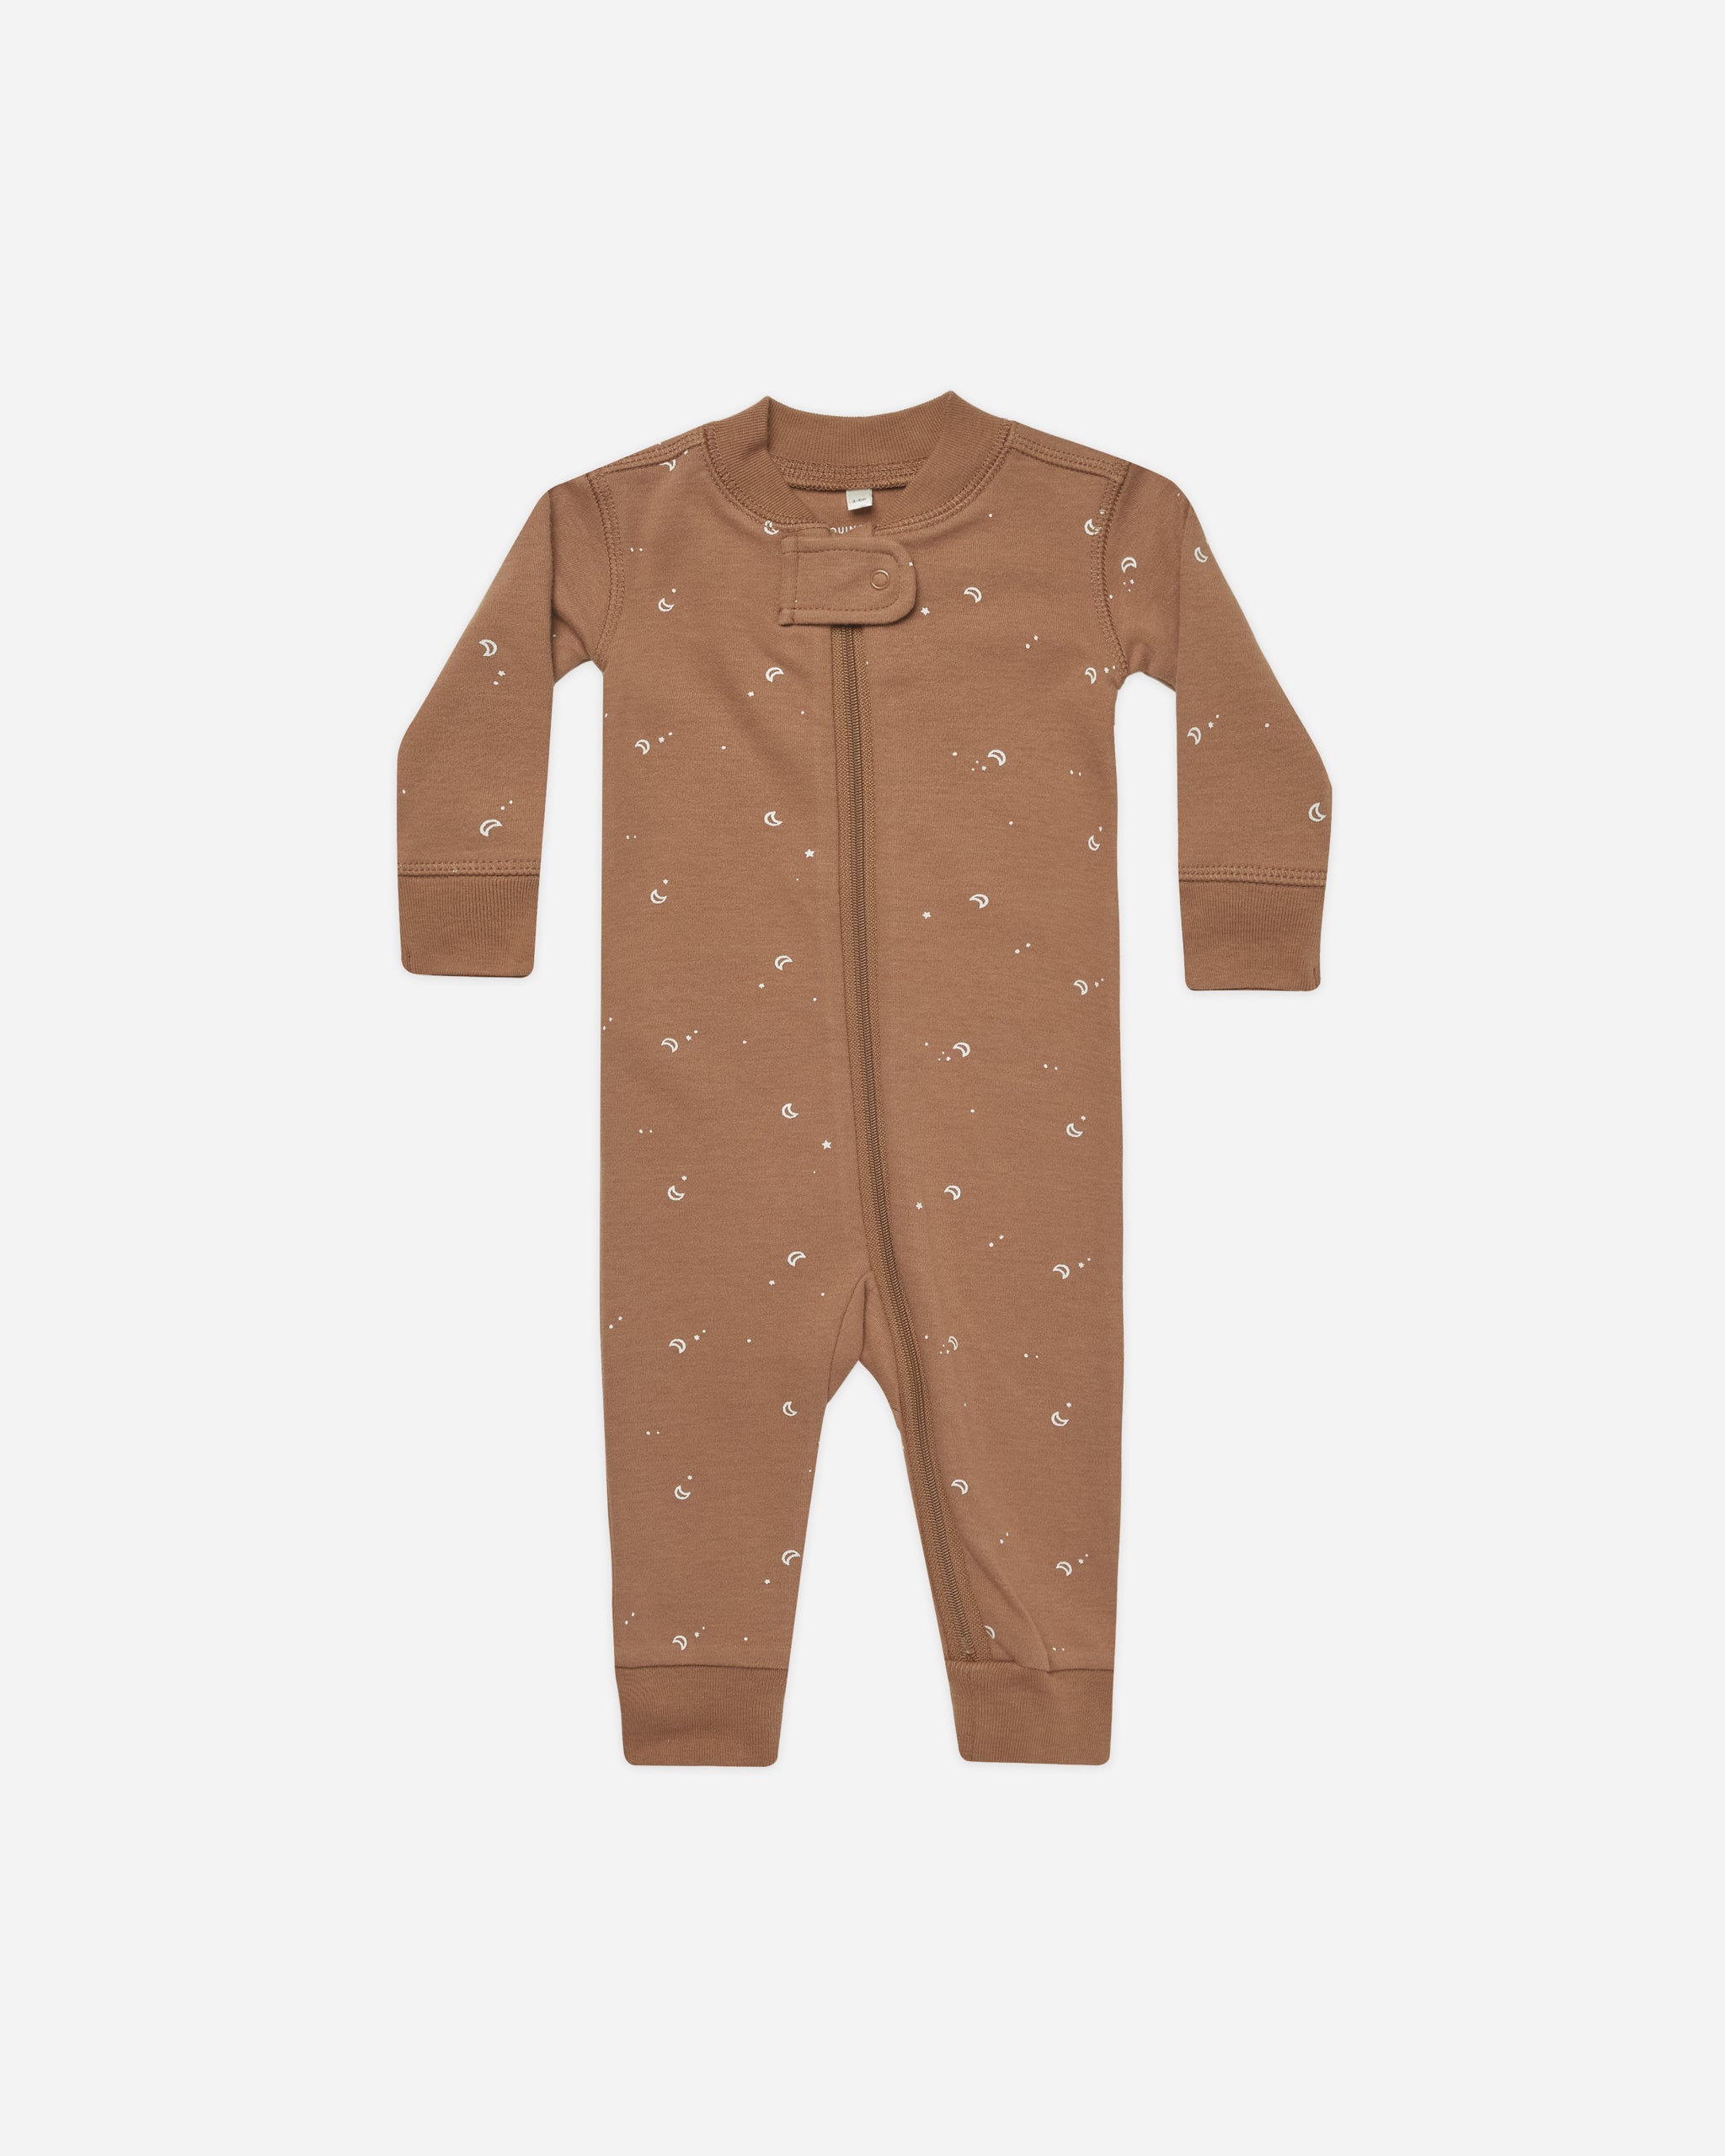 Zip Long Sleeve Sleeper || Moons - Rylee + Cru | Kids Clothes | Trendy Baby Clothes | Modern Infant Outfits |